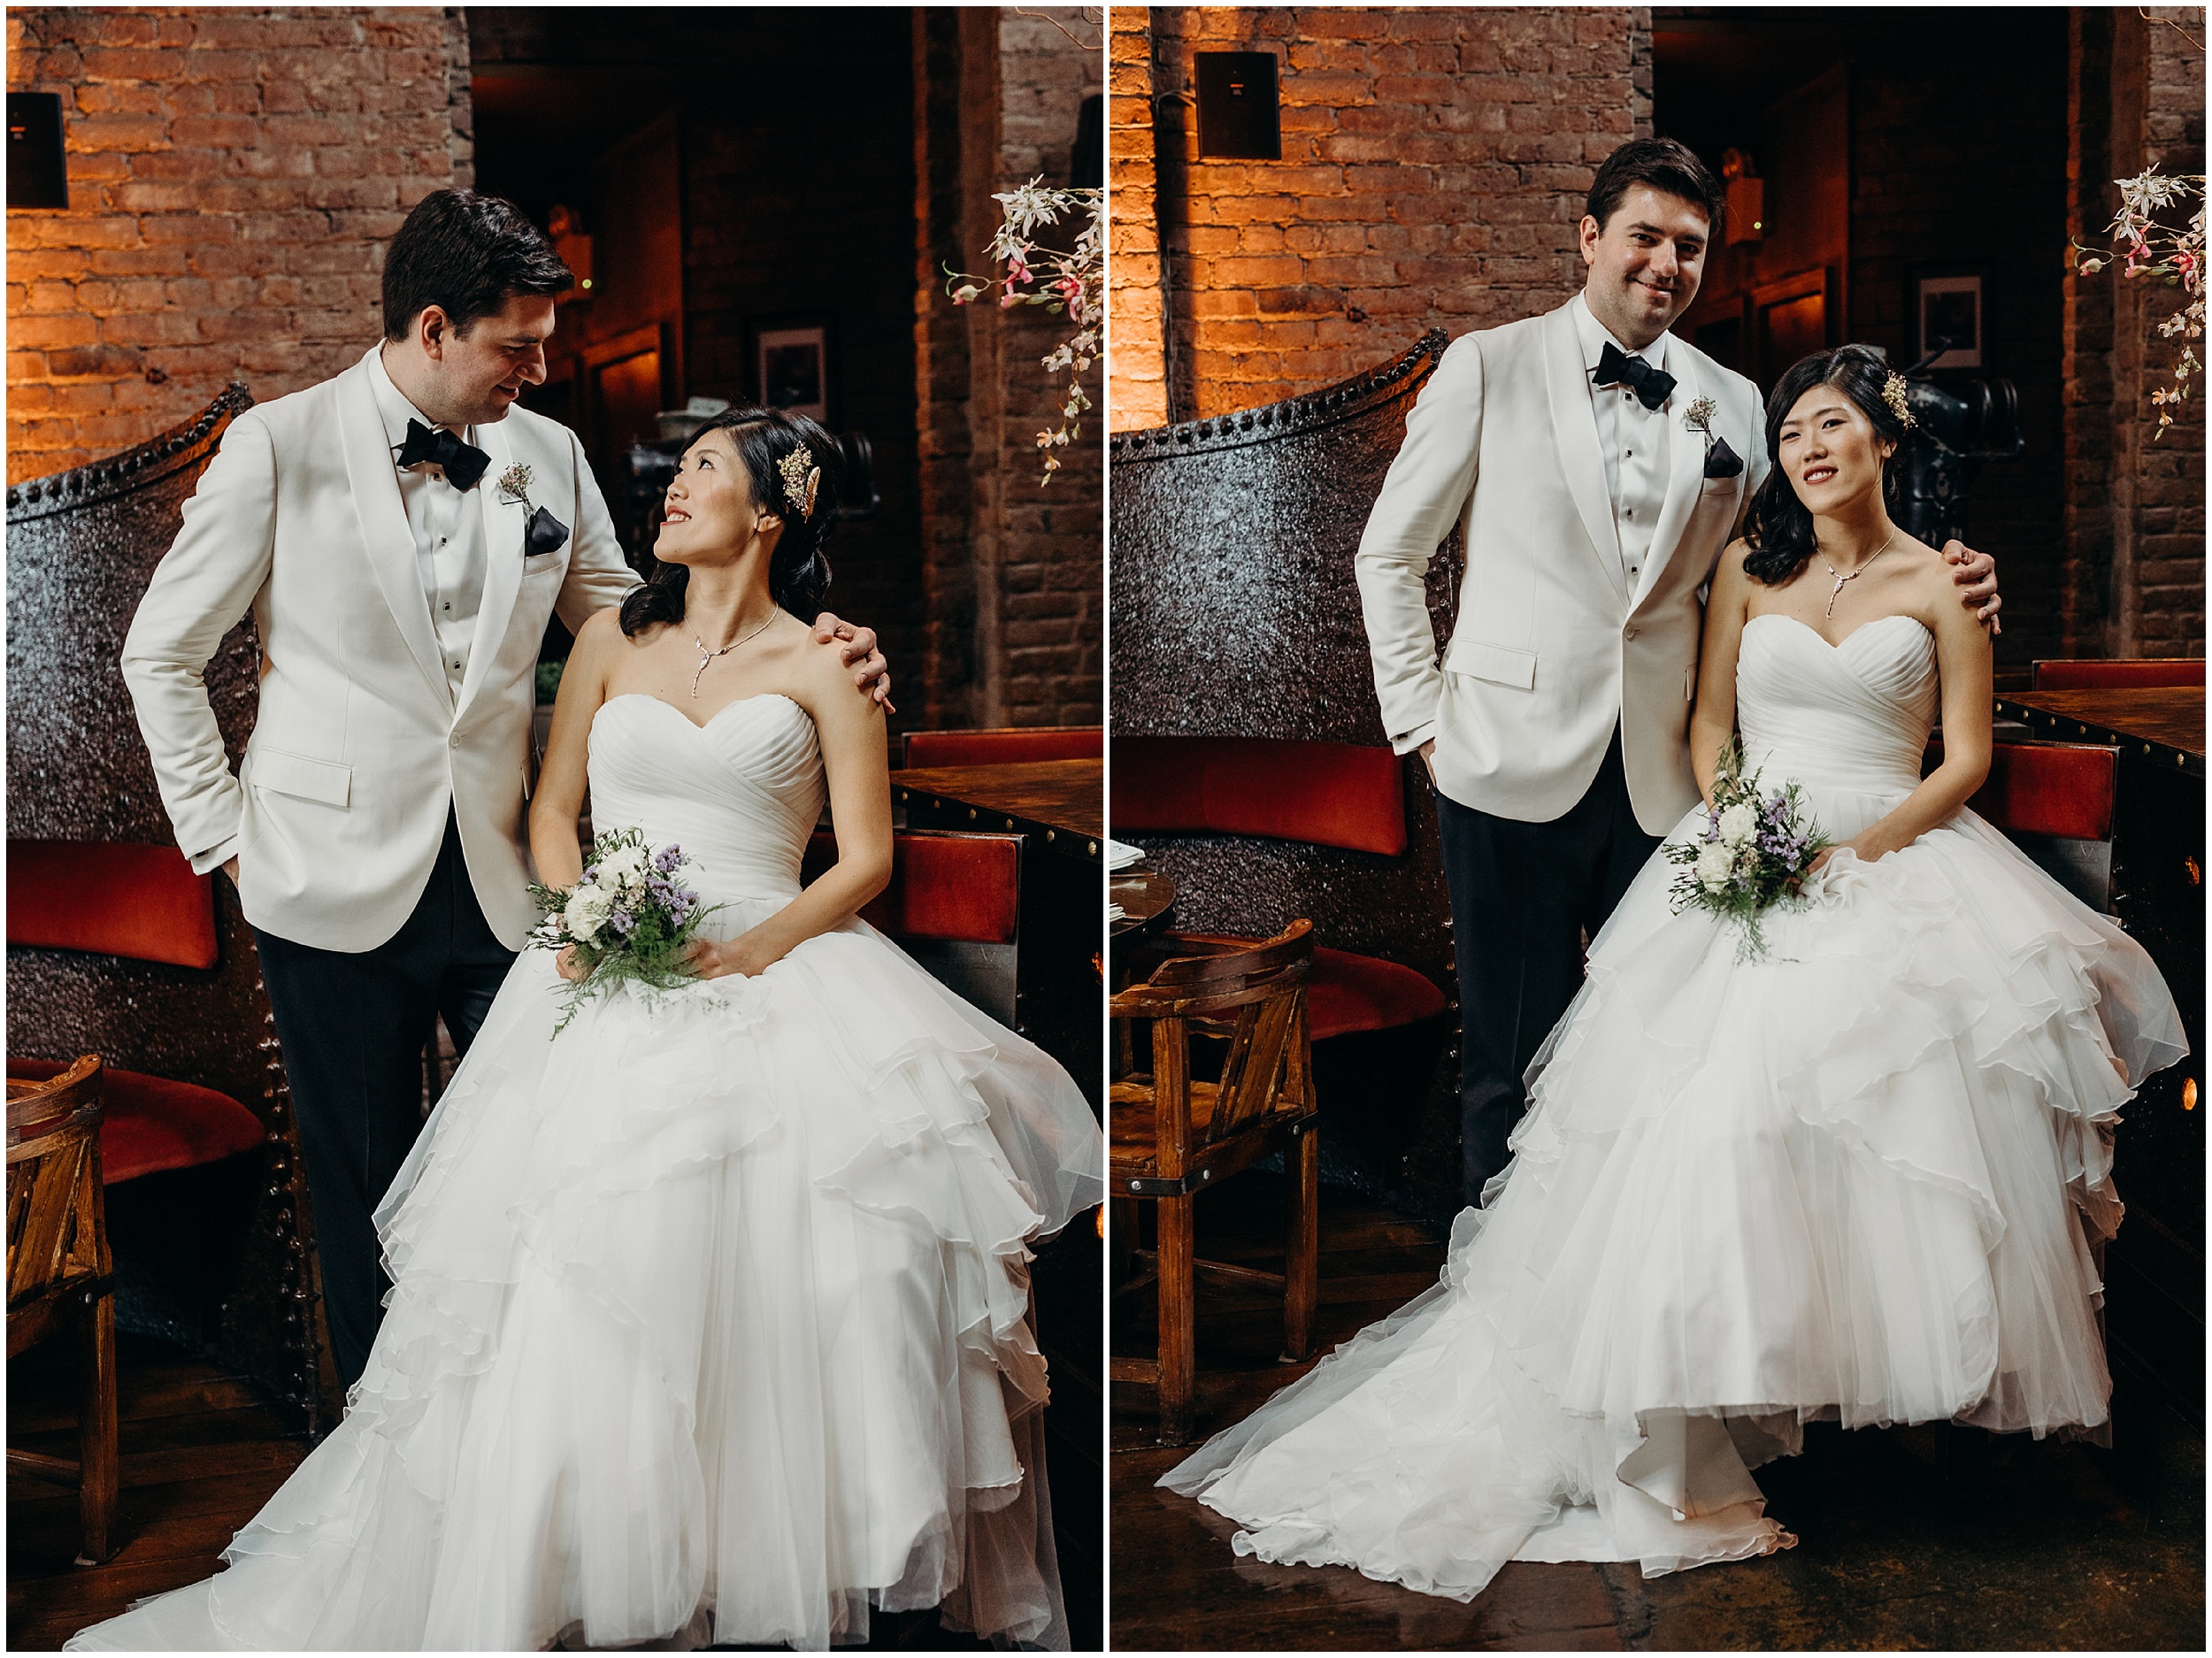 a portrait of a bride and groom at mymoon in brooklyn, new york